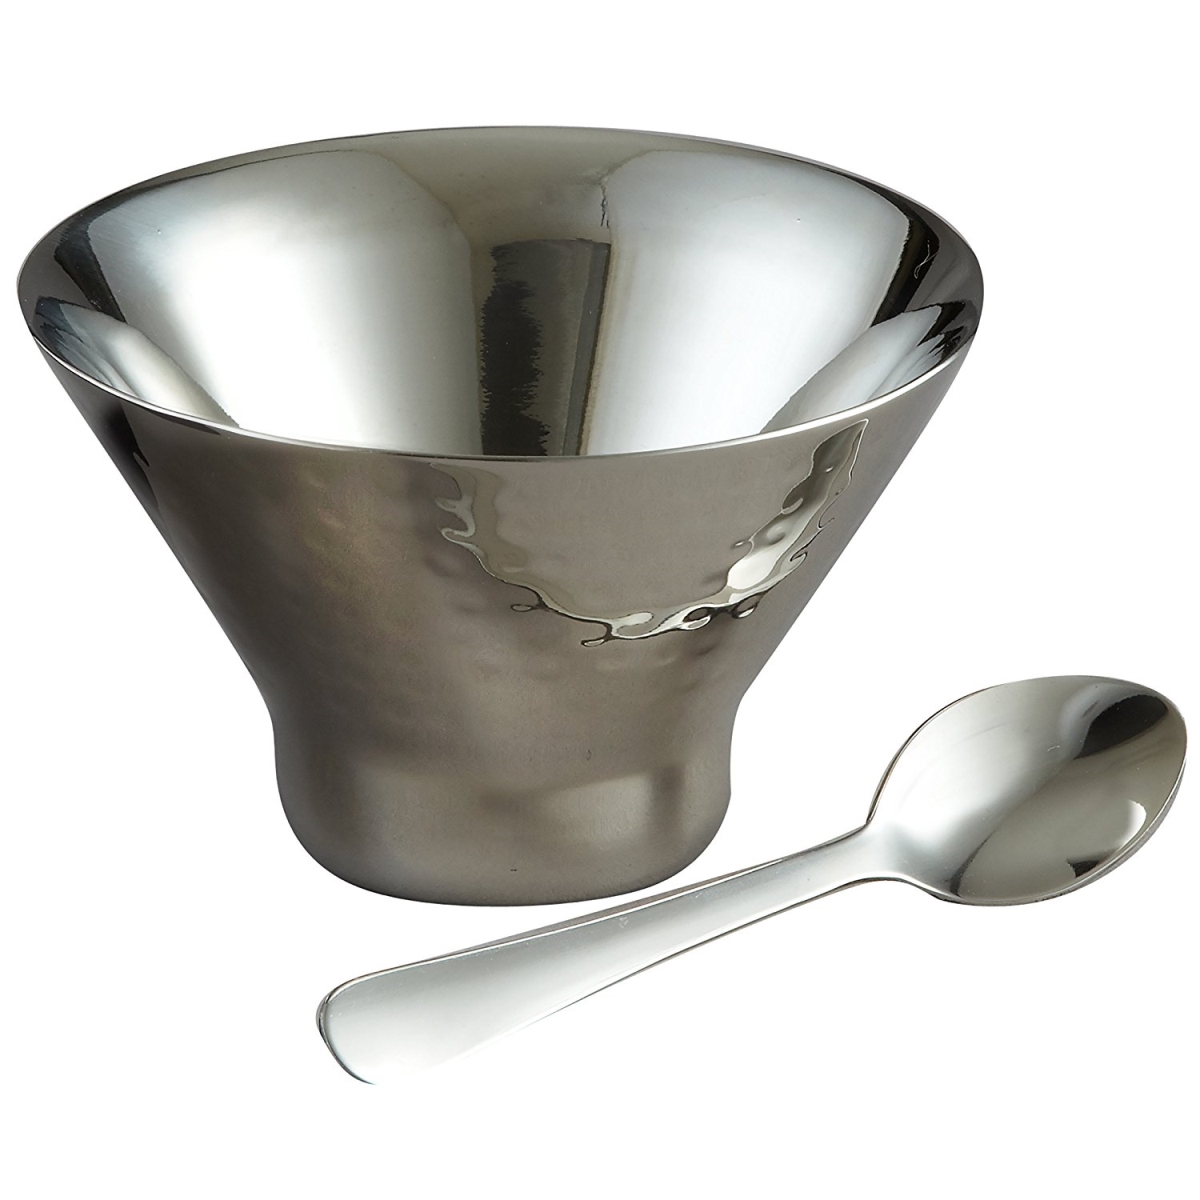 72516 Elegance Stainless Steel Dessert Bowl With Spoon